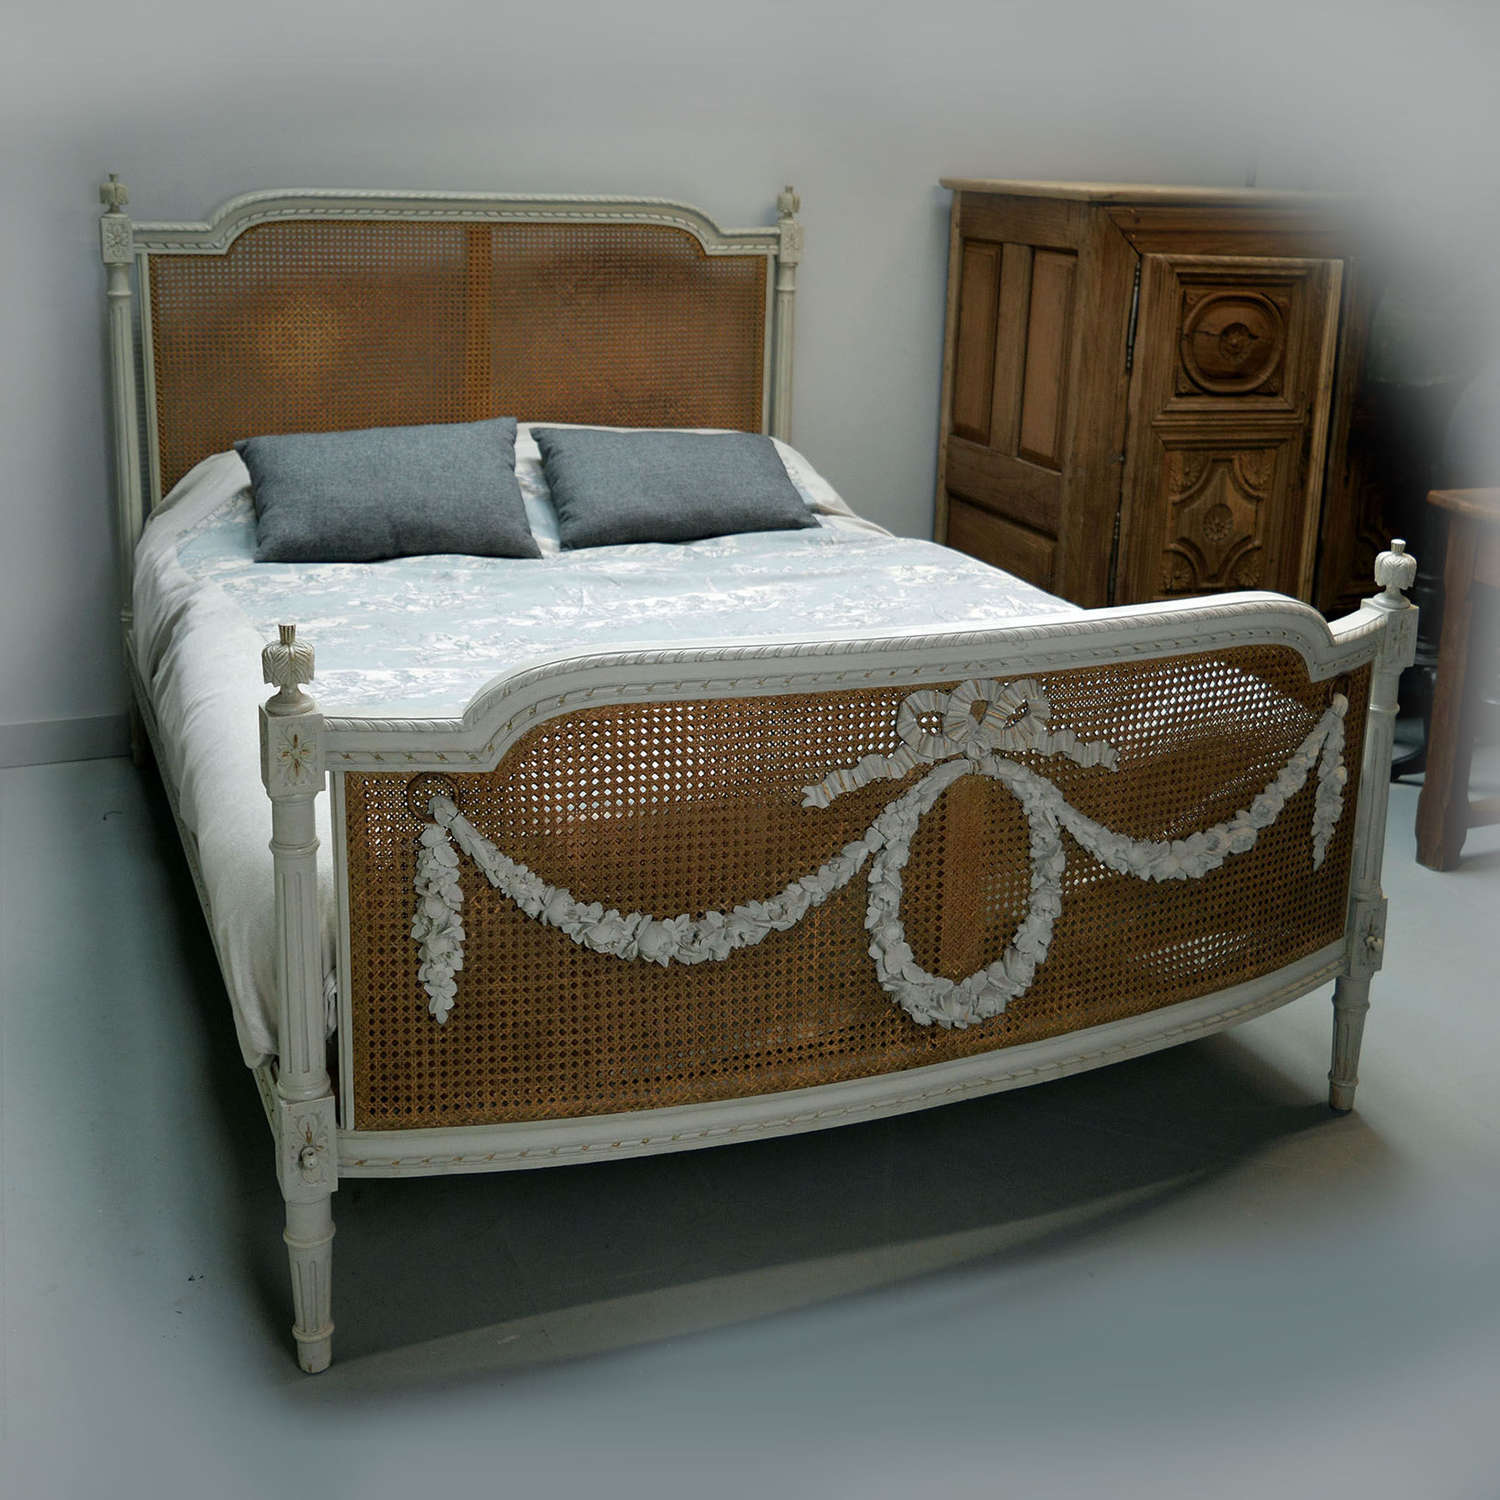 19th Century King Size Louis XVI style caned bedstead